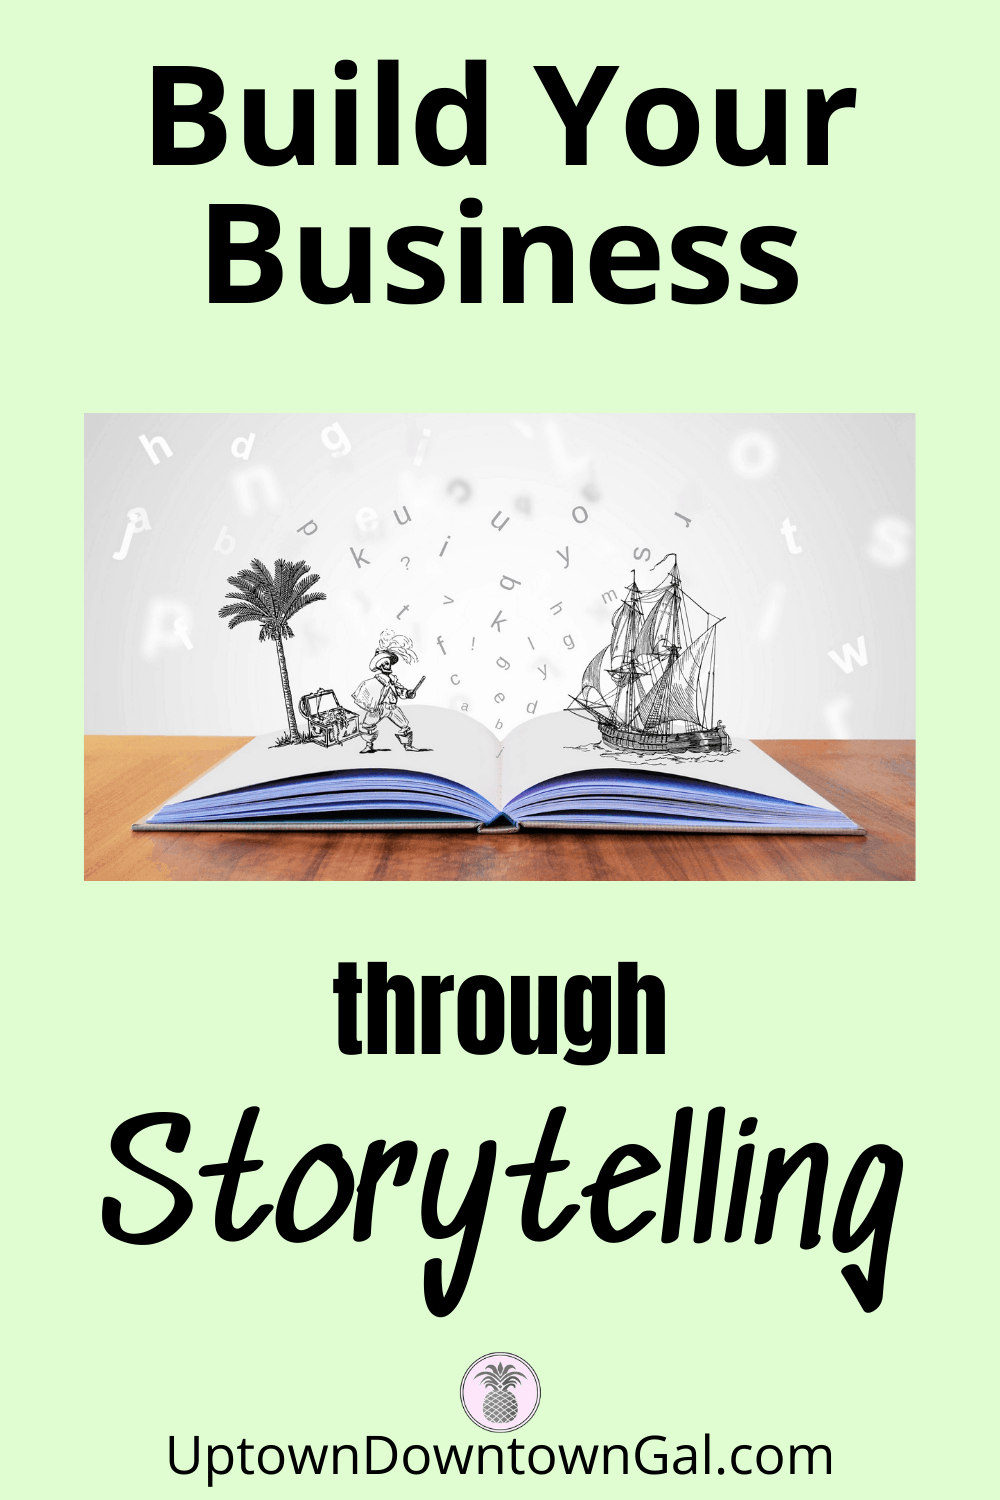 Storytelling-Will-Build-Your-Business-2